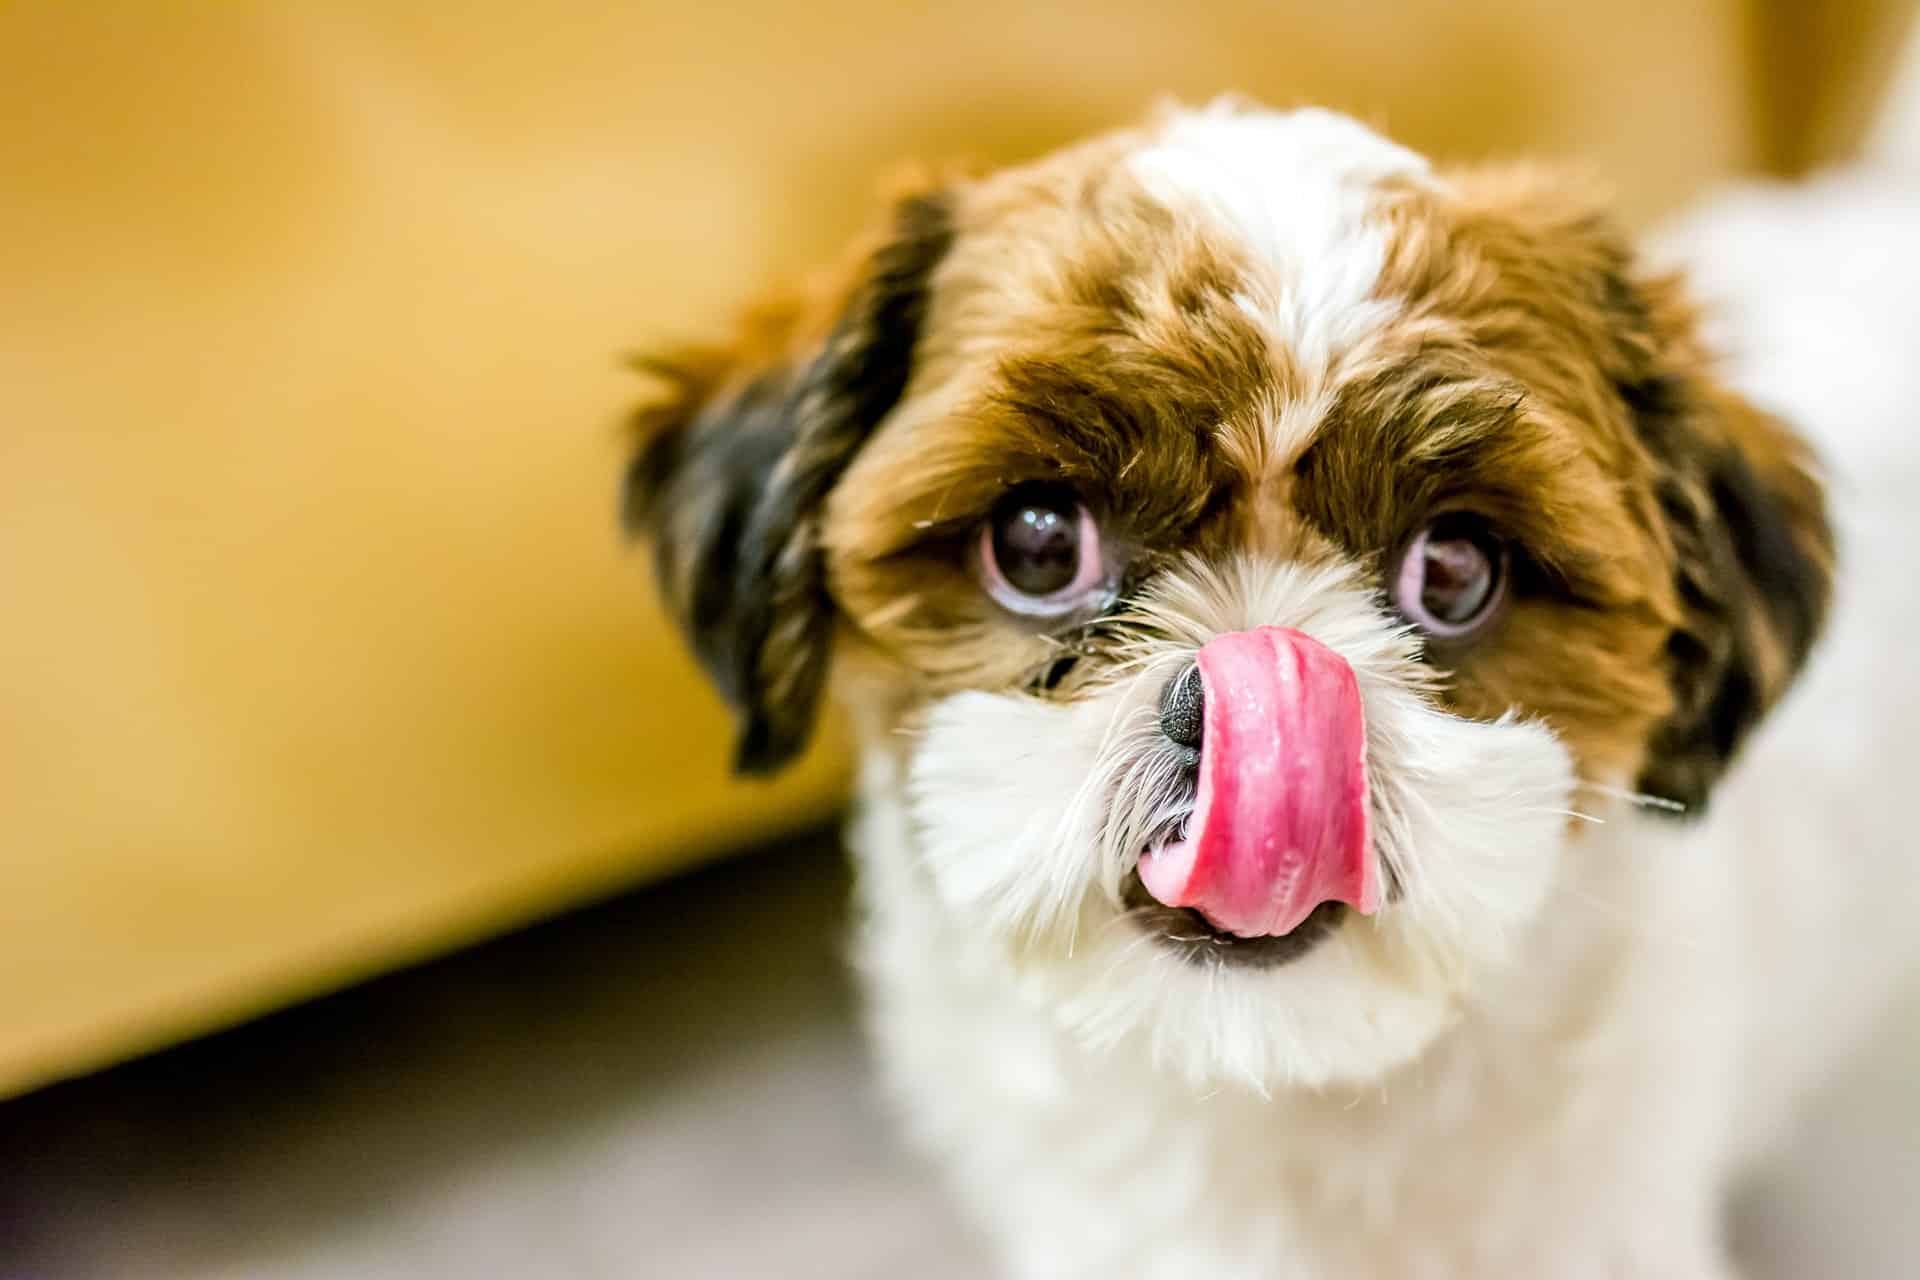 A small dog licking its nose